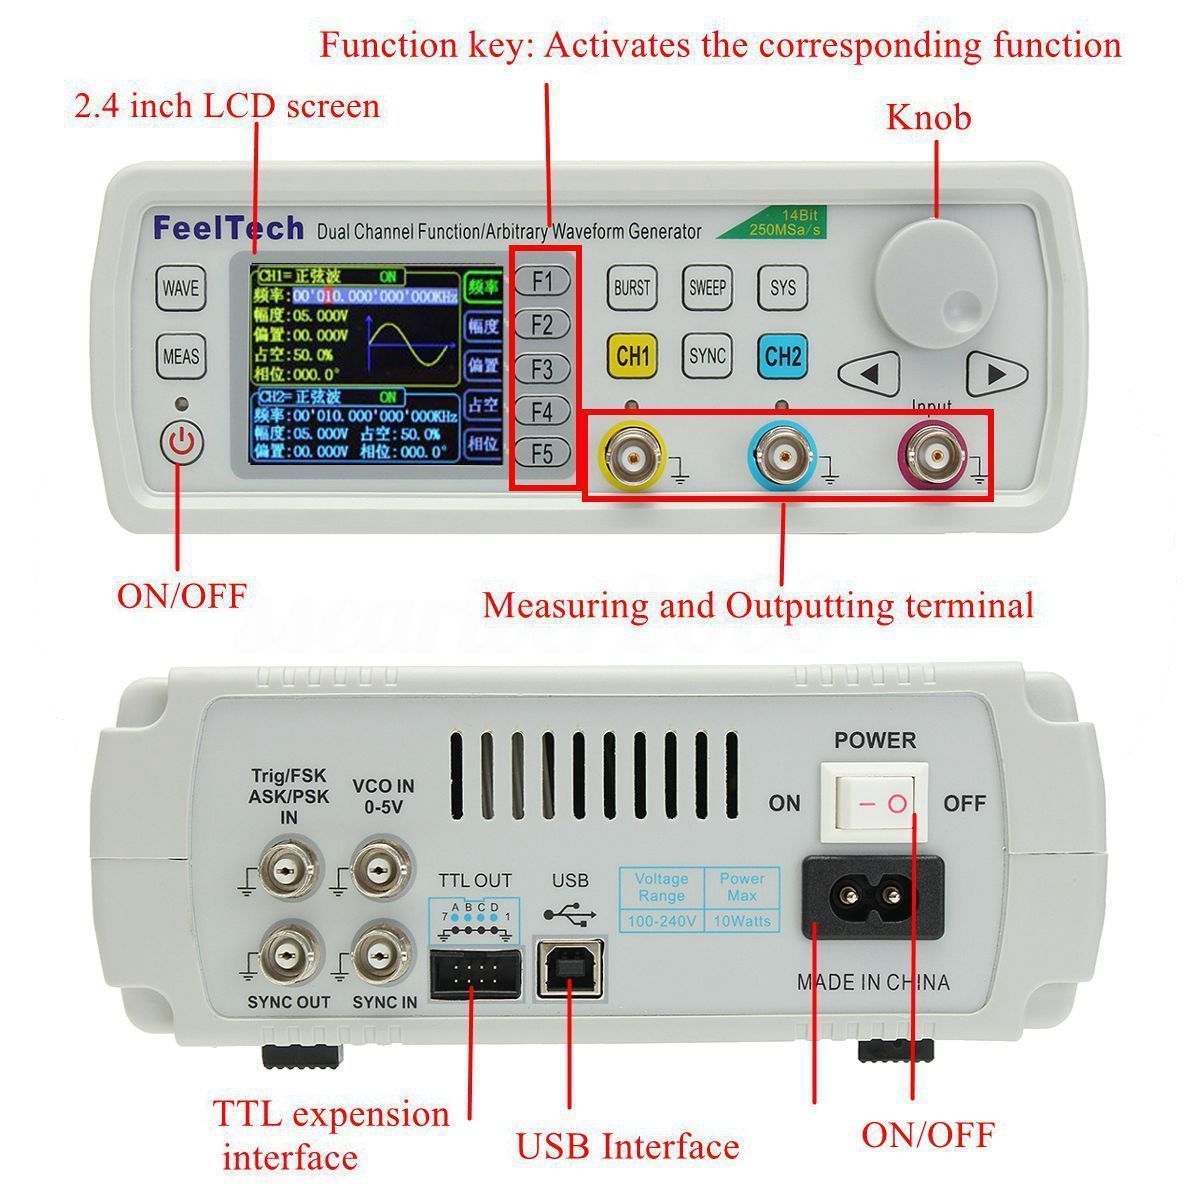 FY6600-Digital-30MHz-60MHz-Dual-Channel-DDS-Function-Arbitrary-Waveform-Signal-Generator-Frequency-M-1957884-2